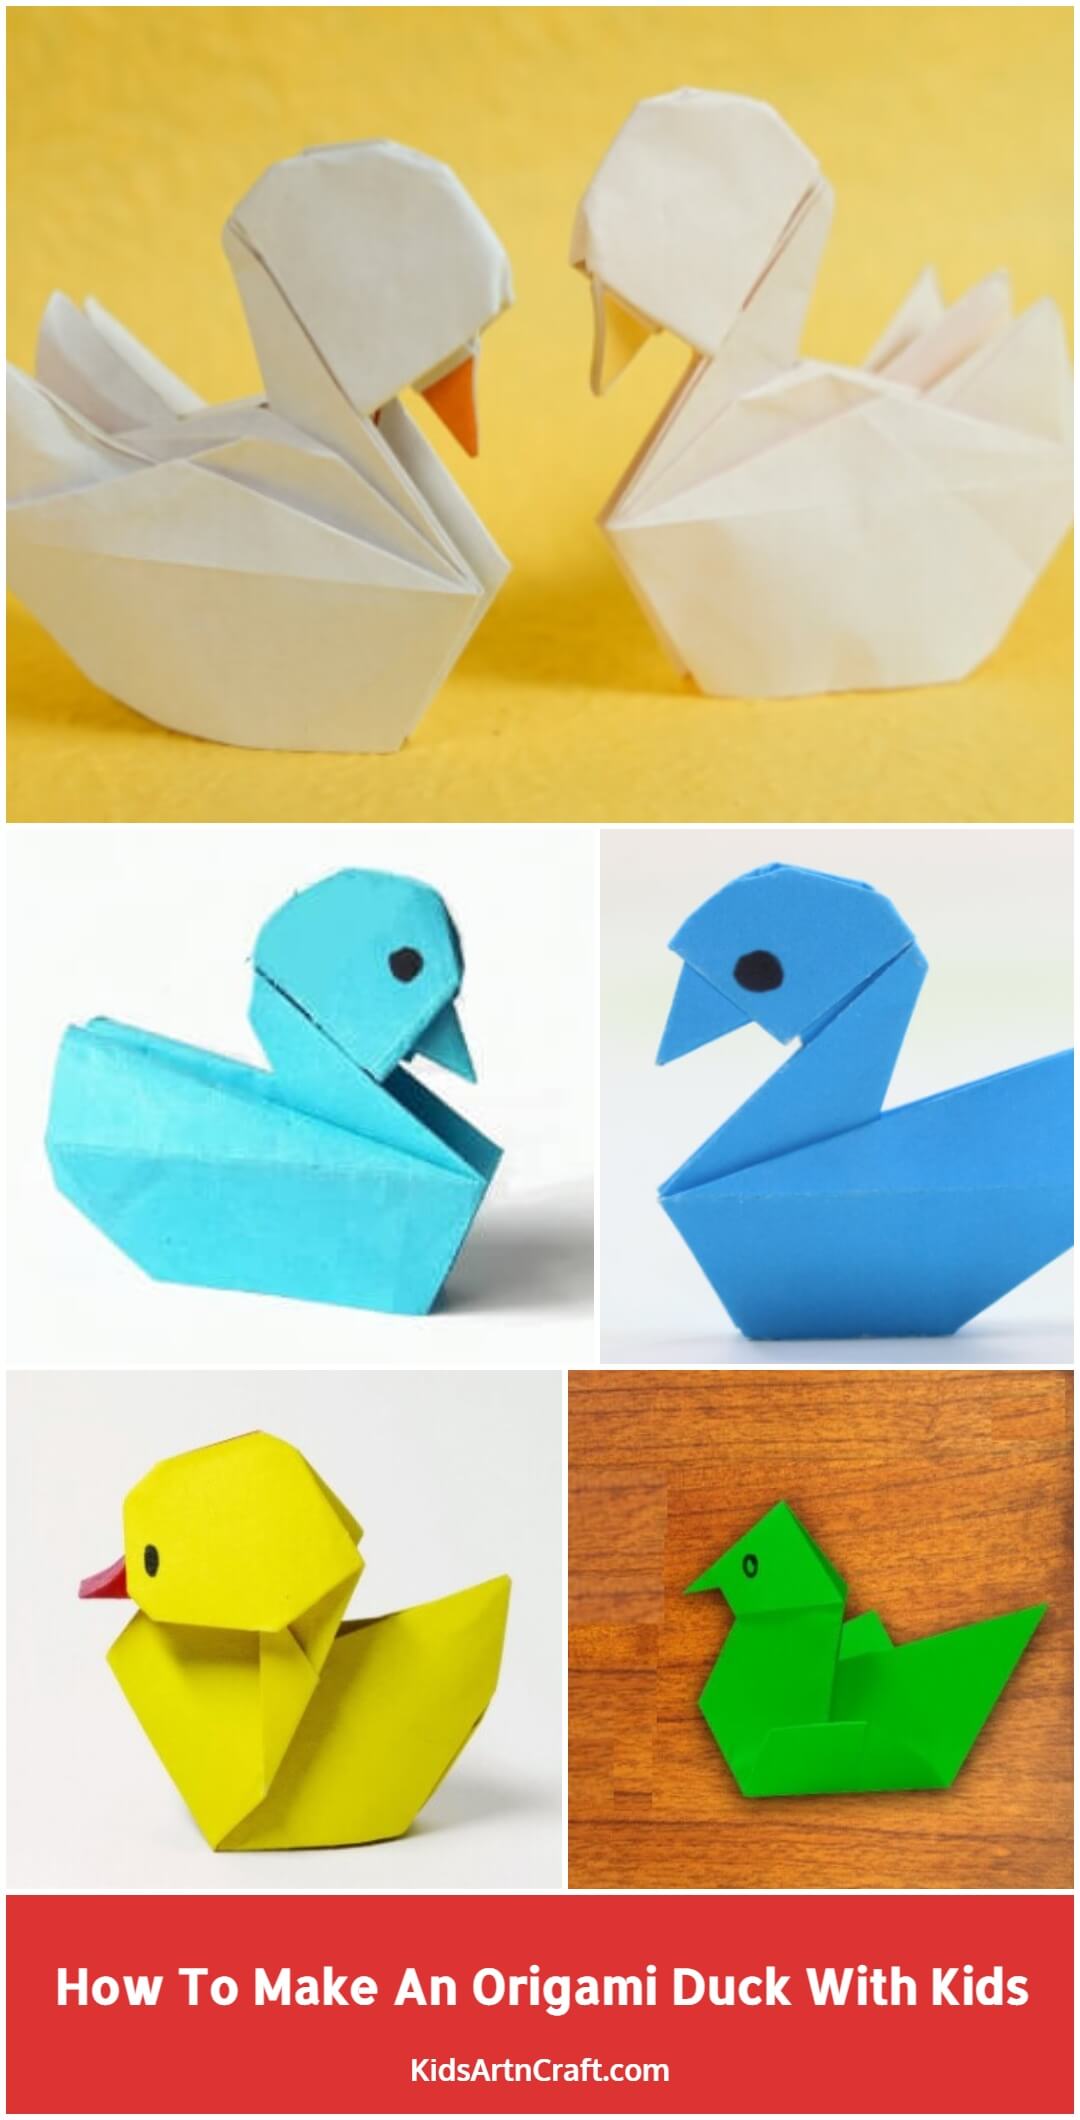 How To Make An Origami Duck With Kids